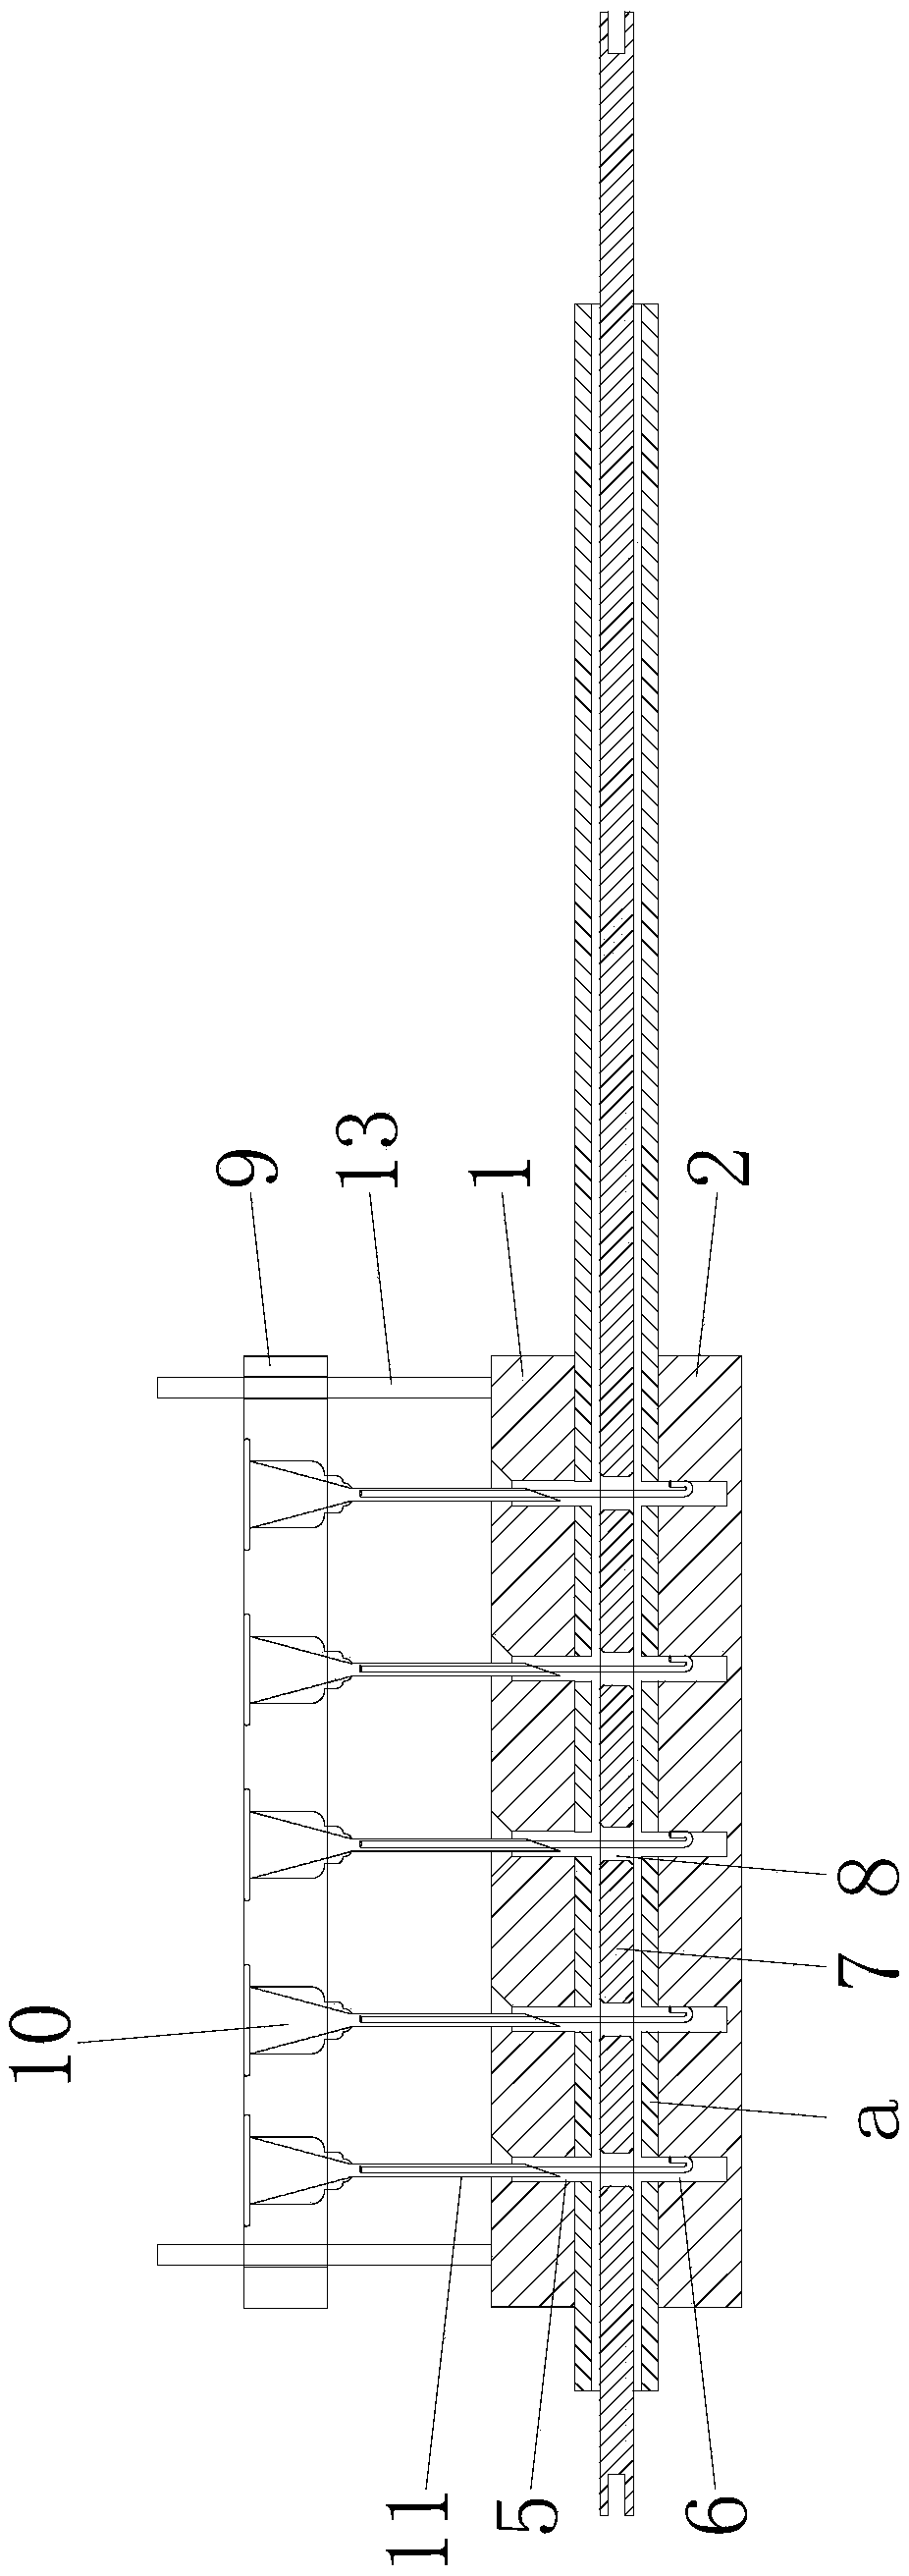 A device and a method for laying a lead by an electrode cathete